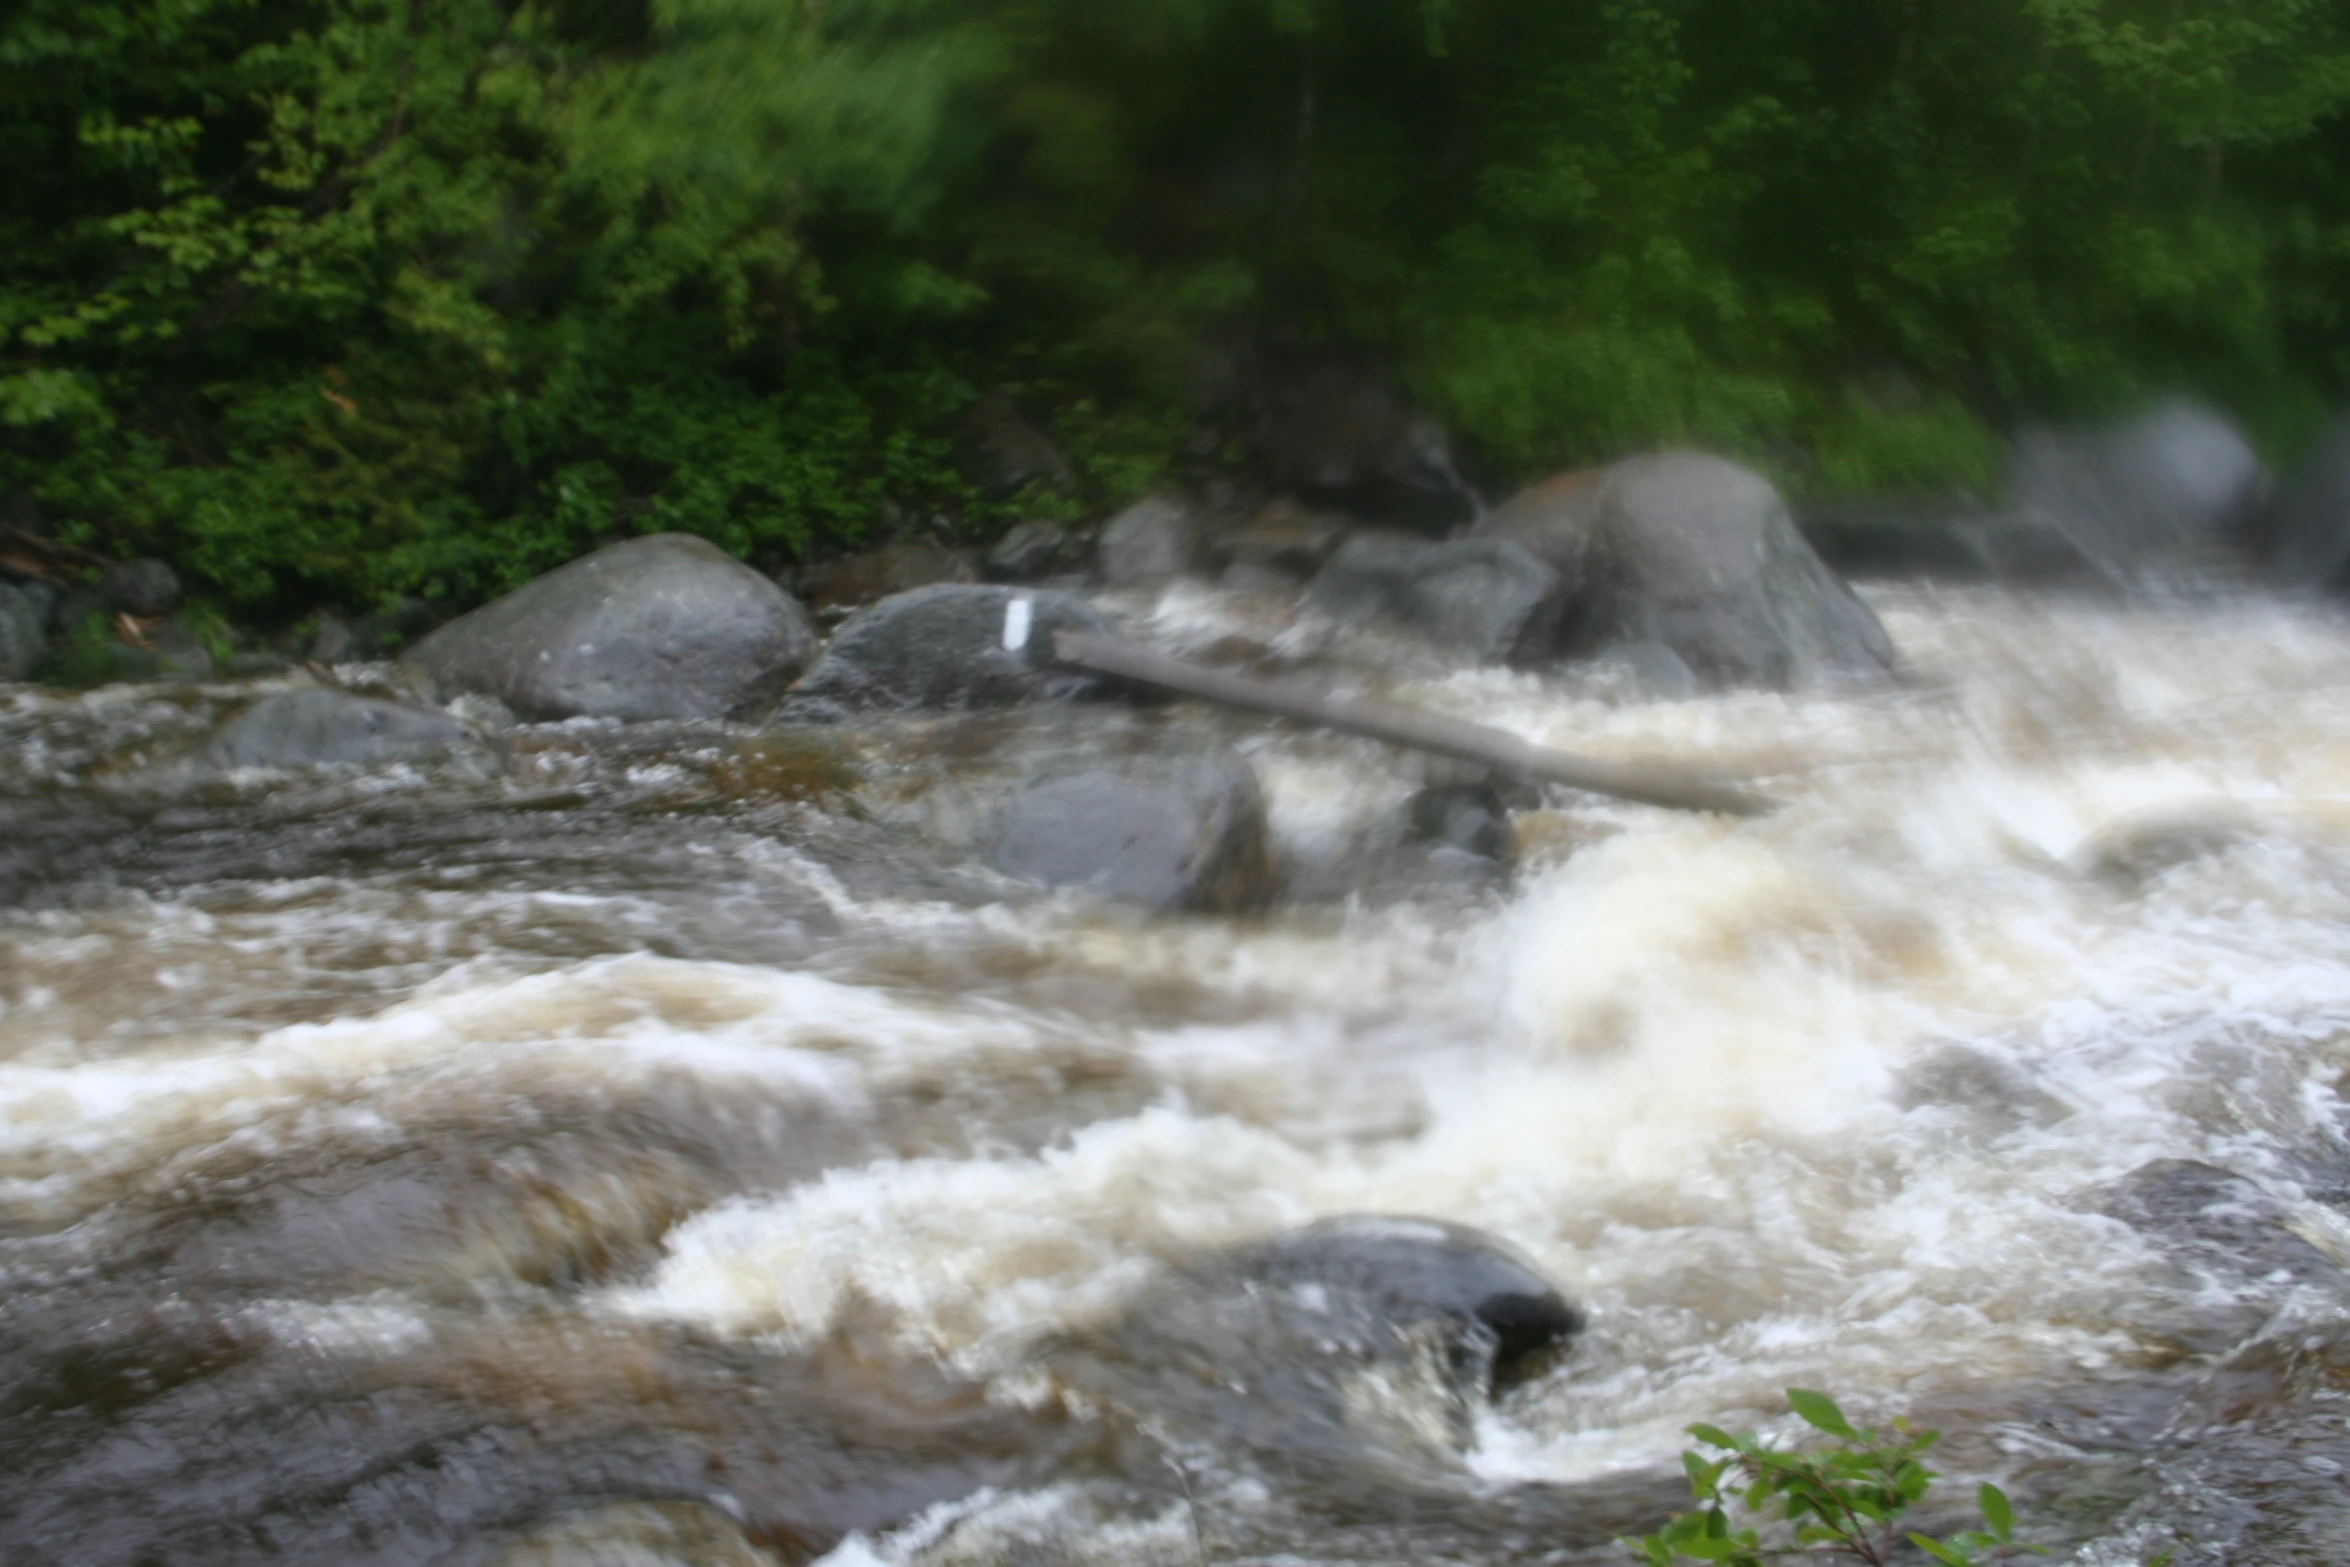 the large, rough river in a mountainous wilderness area is churning rapids